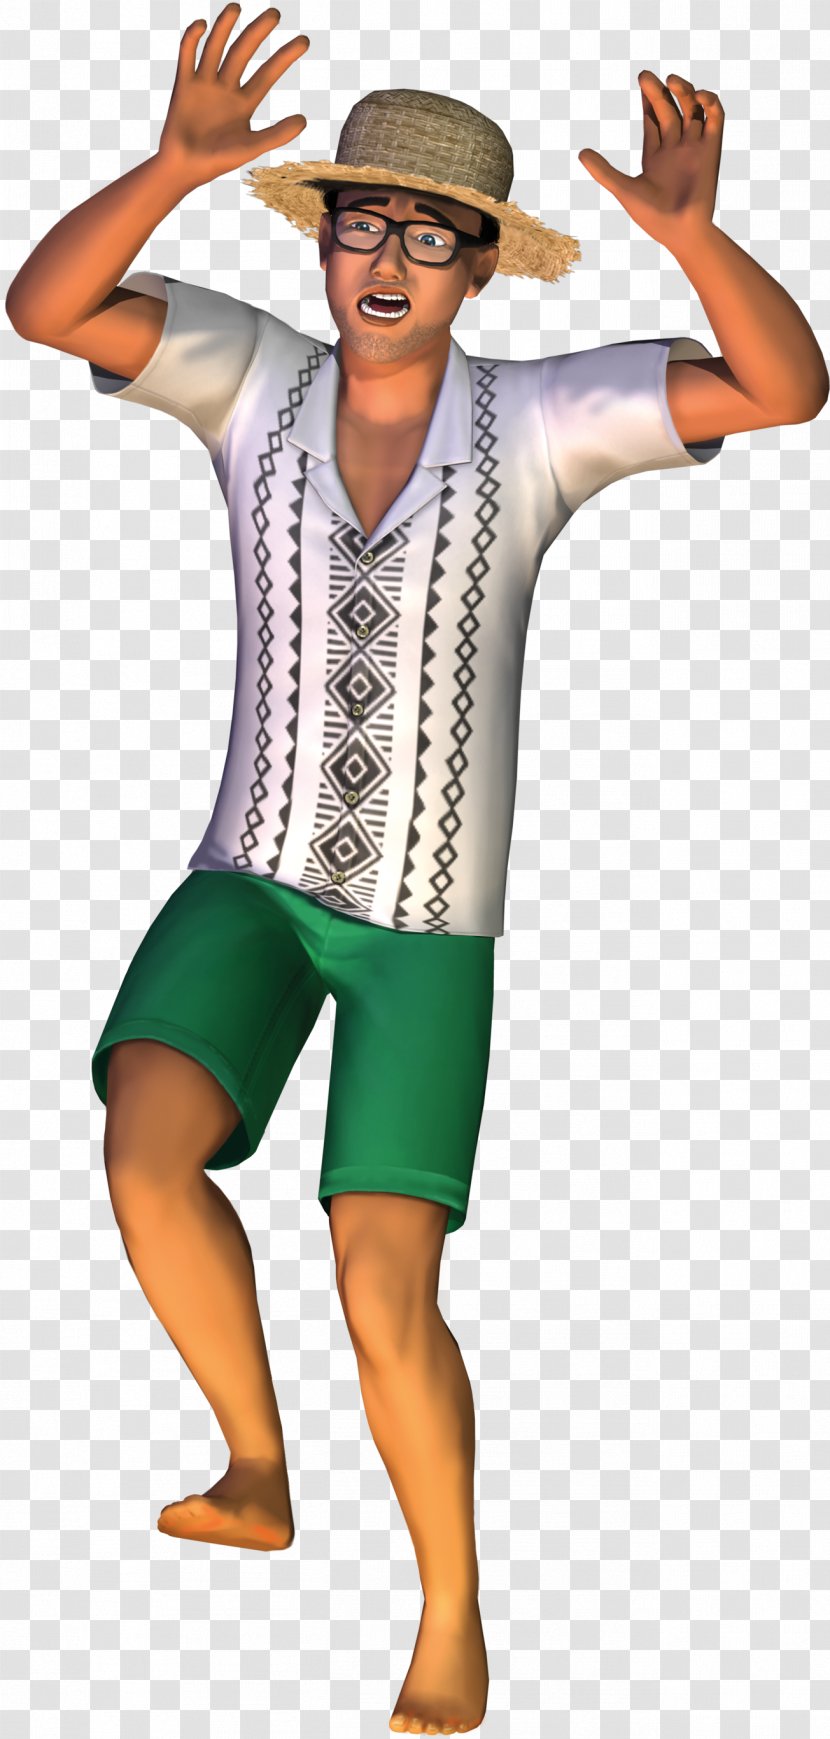 The Sims 3: Island Paradise World Adventures 4: City Living 2 - Arm Transparent PNG